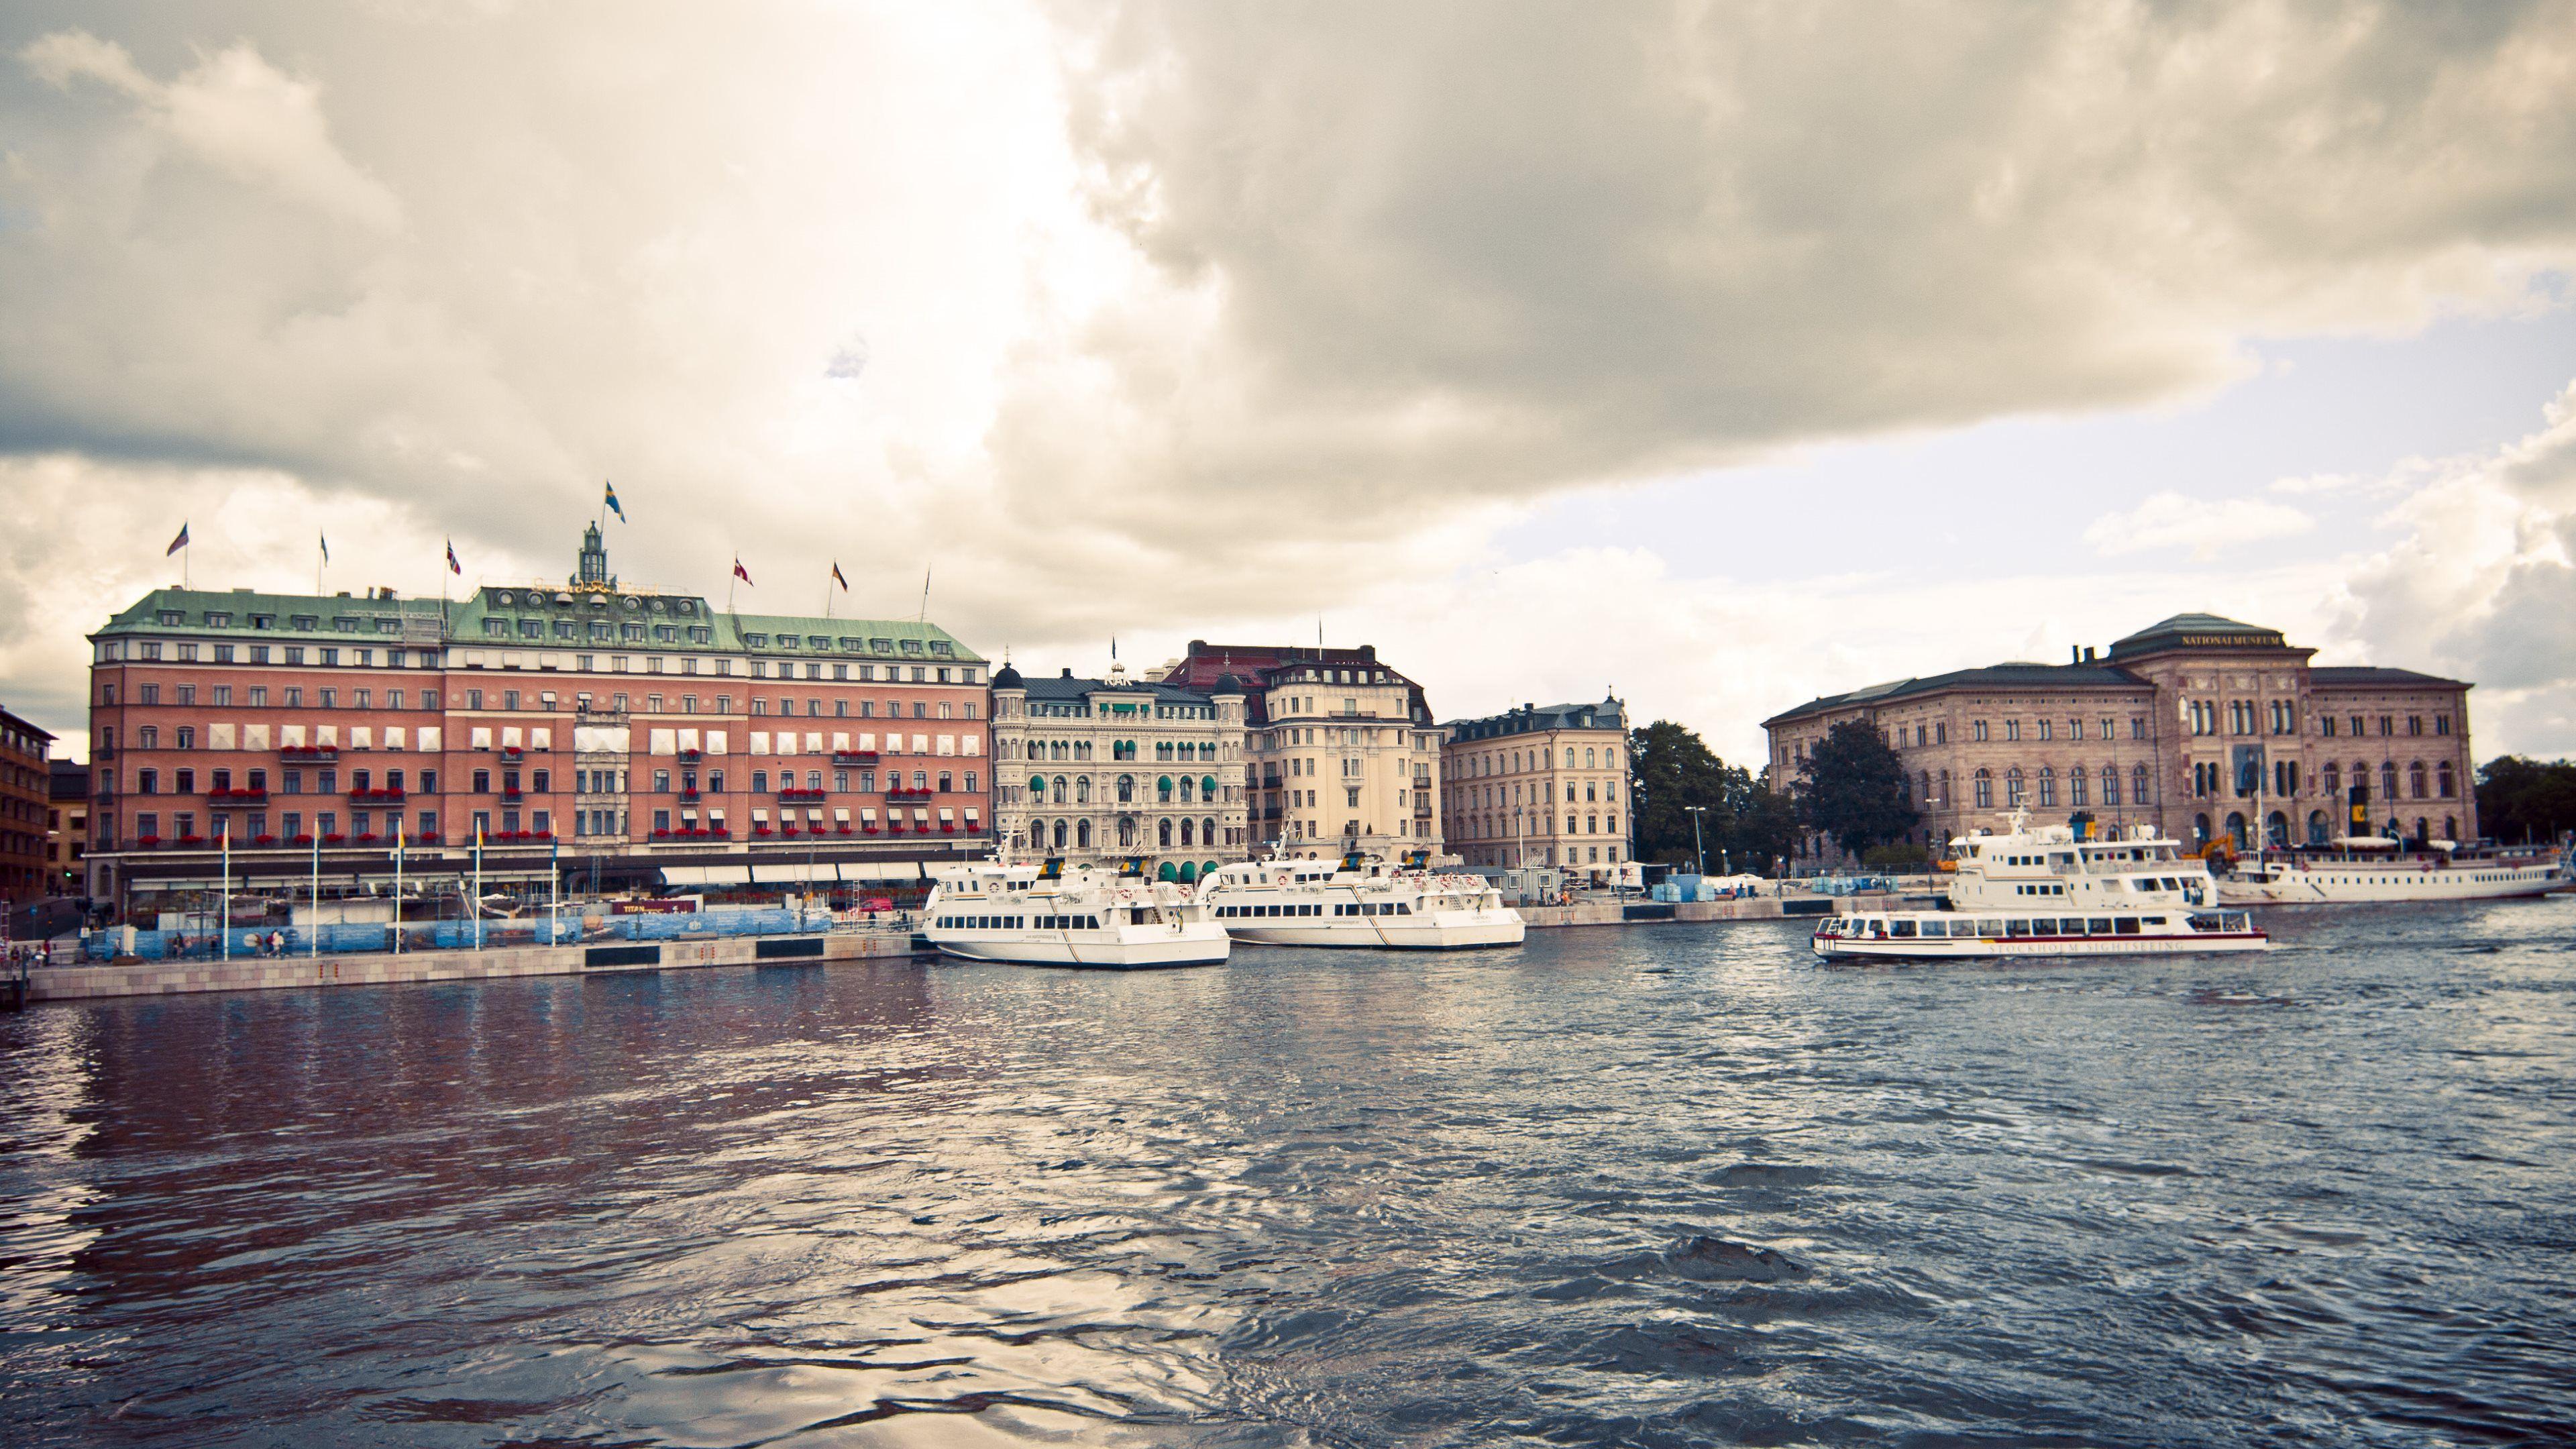 Trip Through Stockholm Wallpaper in HD, 4K and wide sizes